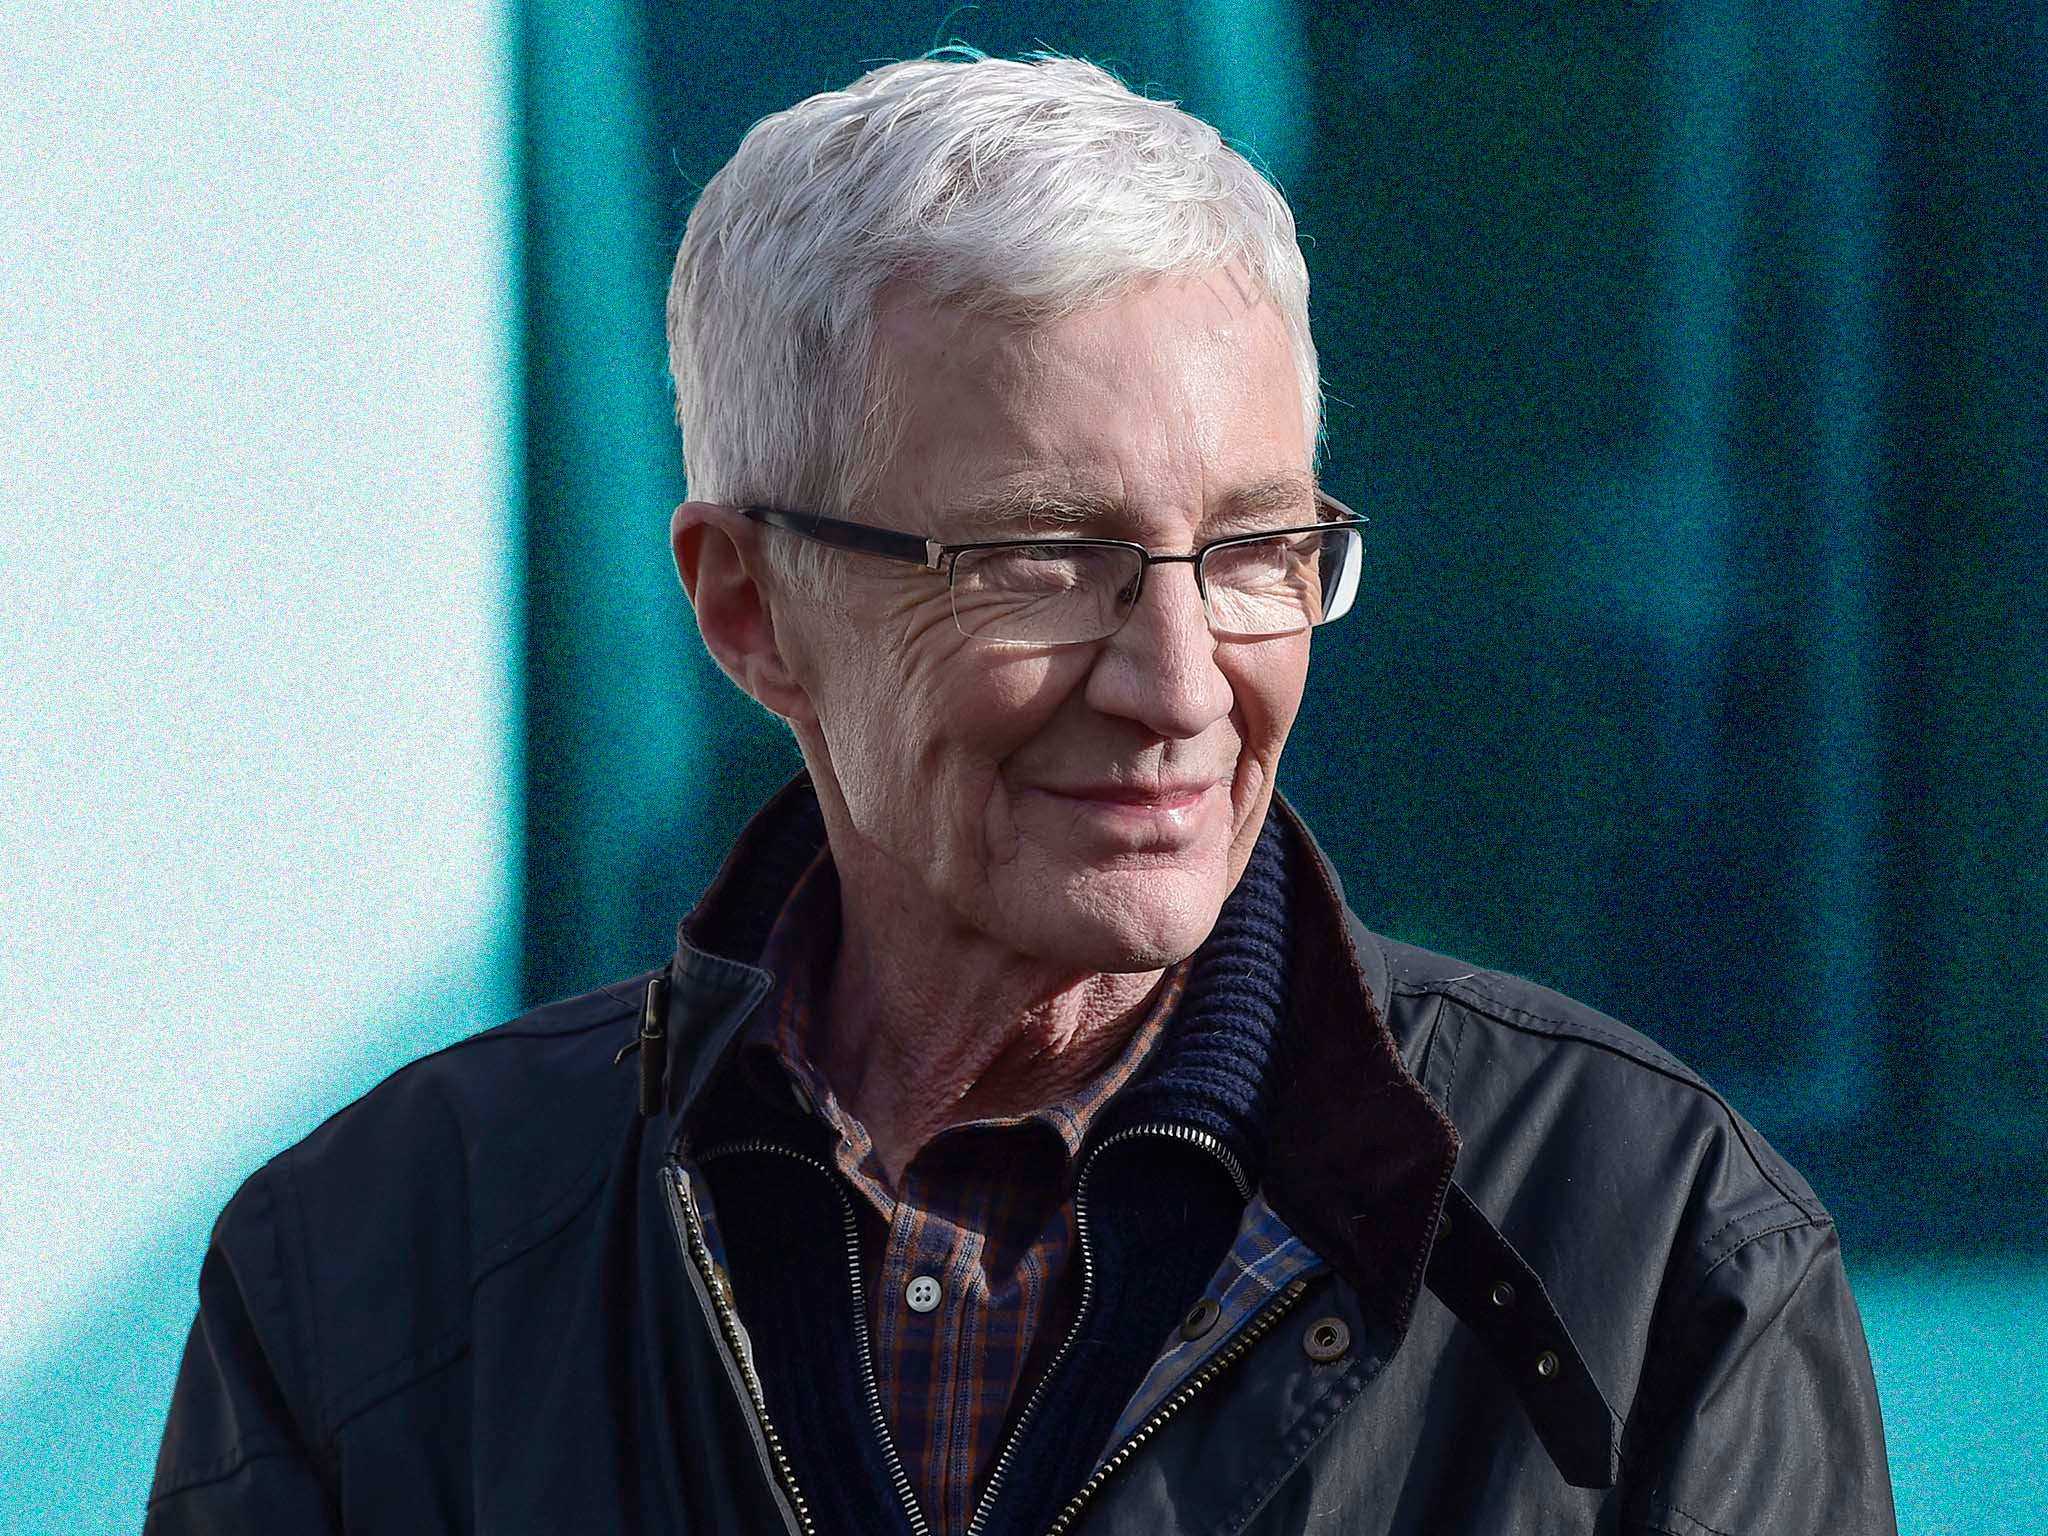 The late entertainer Paul O’Grady was heaped with ‘true gent' platitudes after his sad death in March